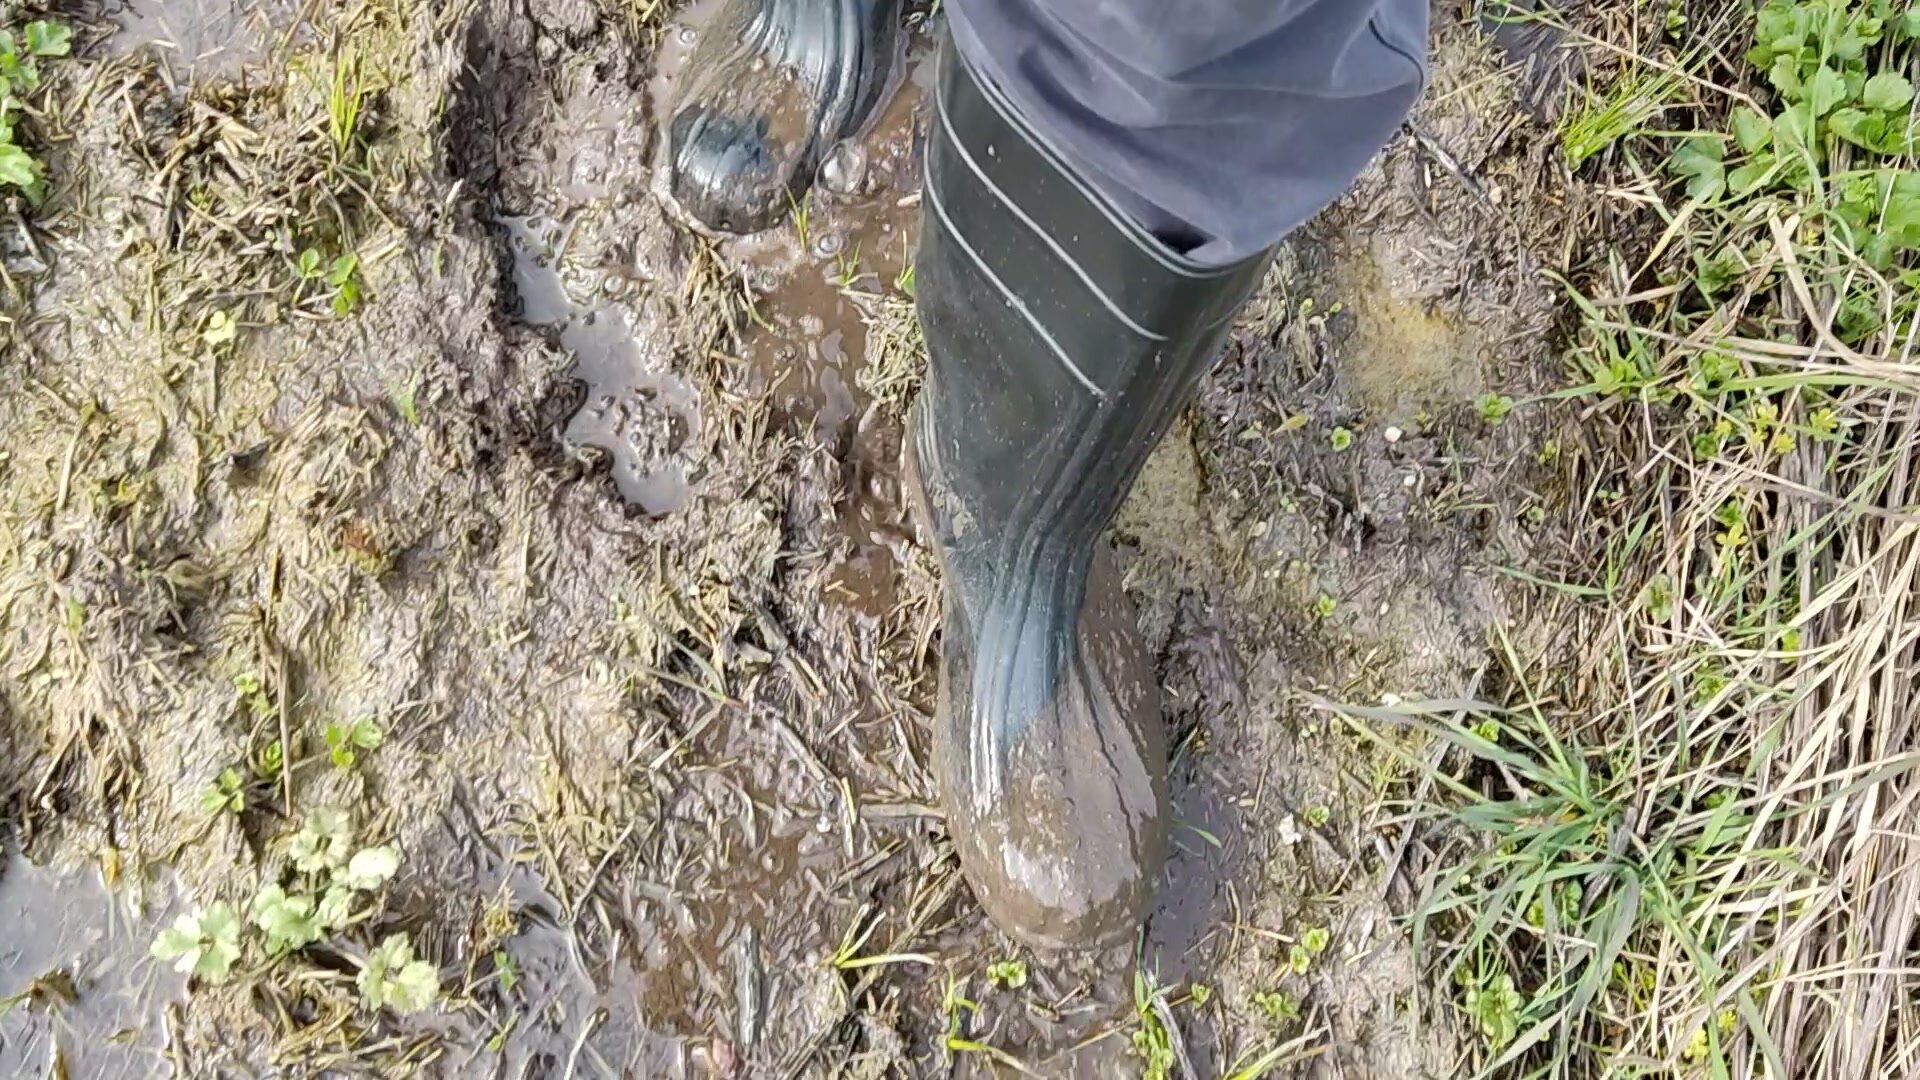 Rubber boots in mud - video 10